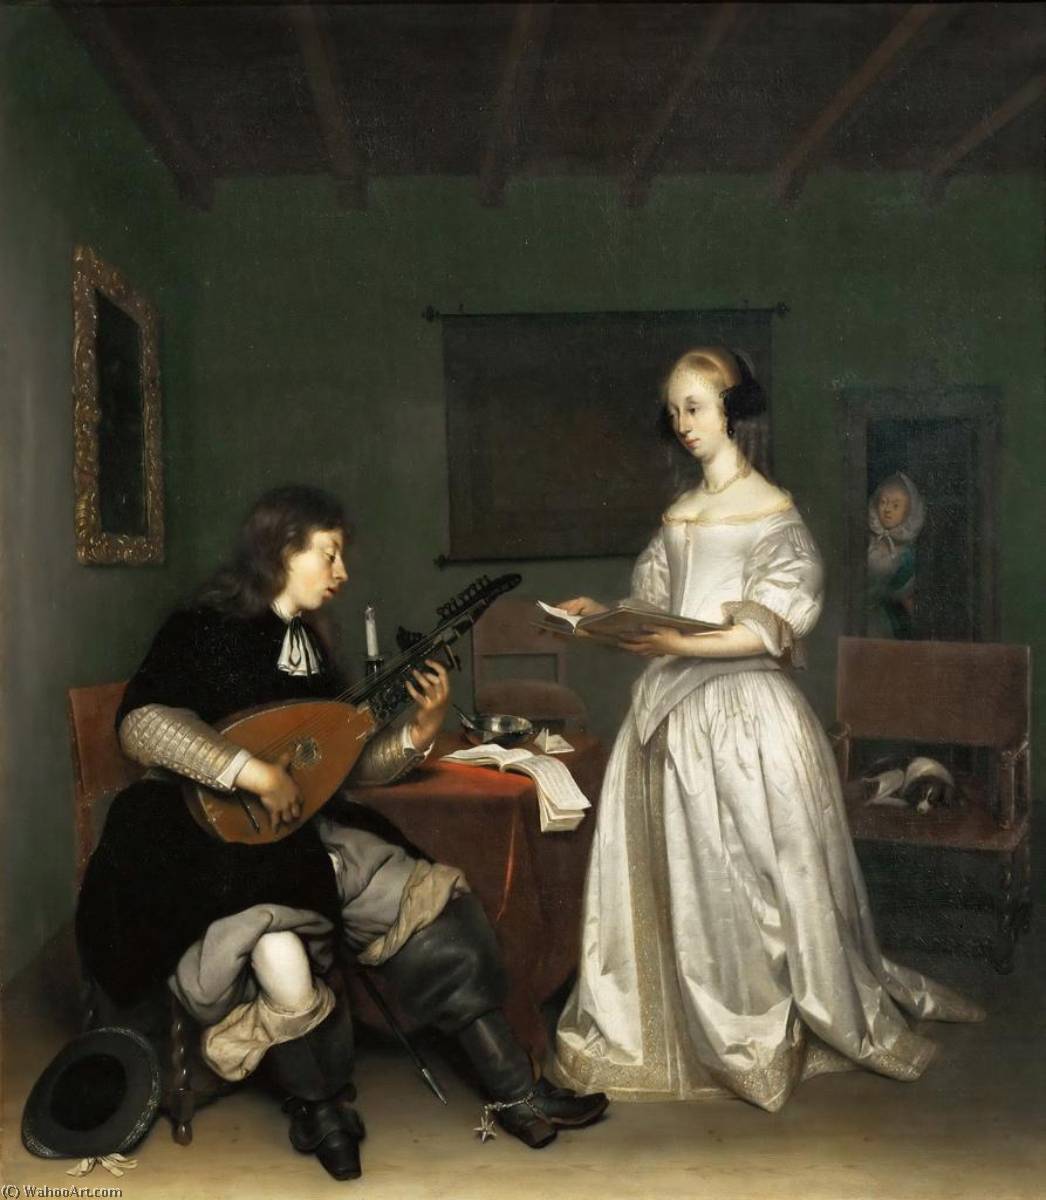 WikiOO.org - 백과 사전 - 회화, 삽화 Gerard Ter Borch The Younger - Duo, Singer and Theorbo Player